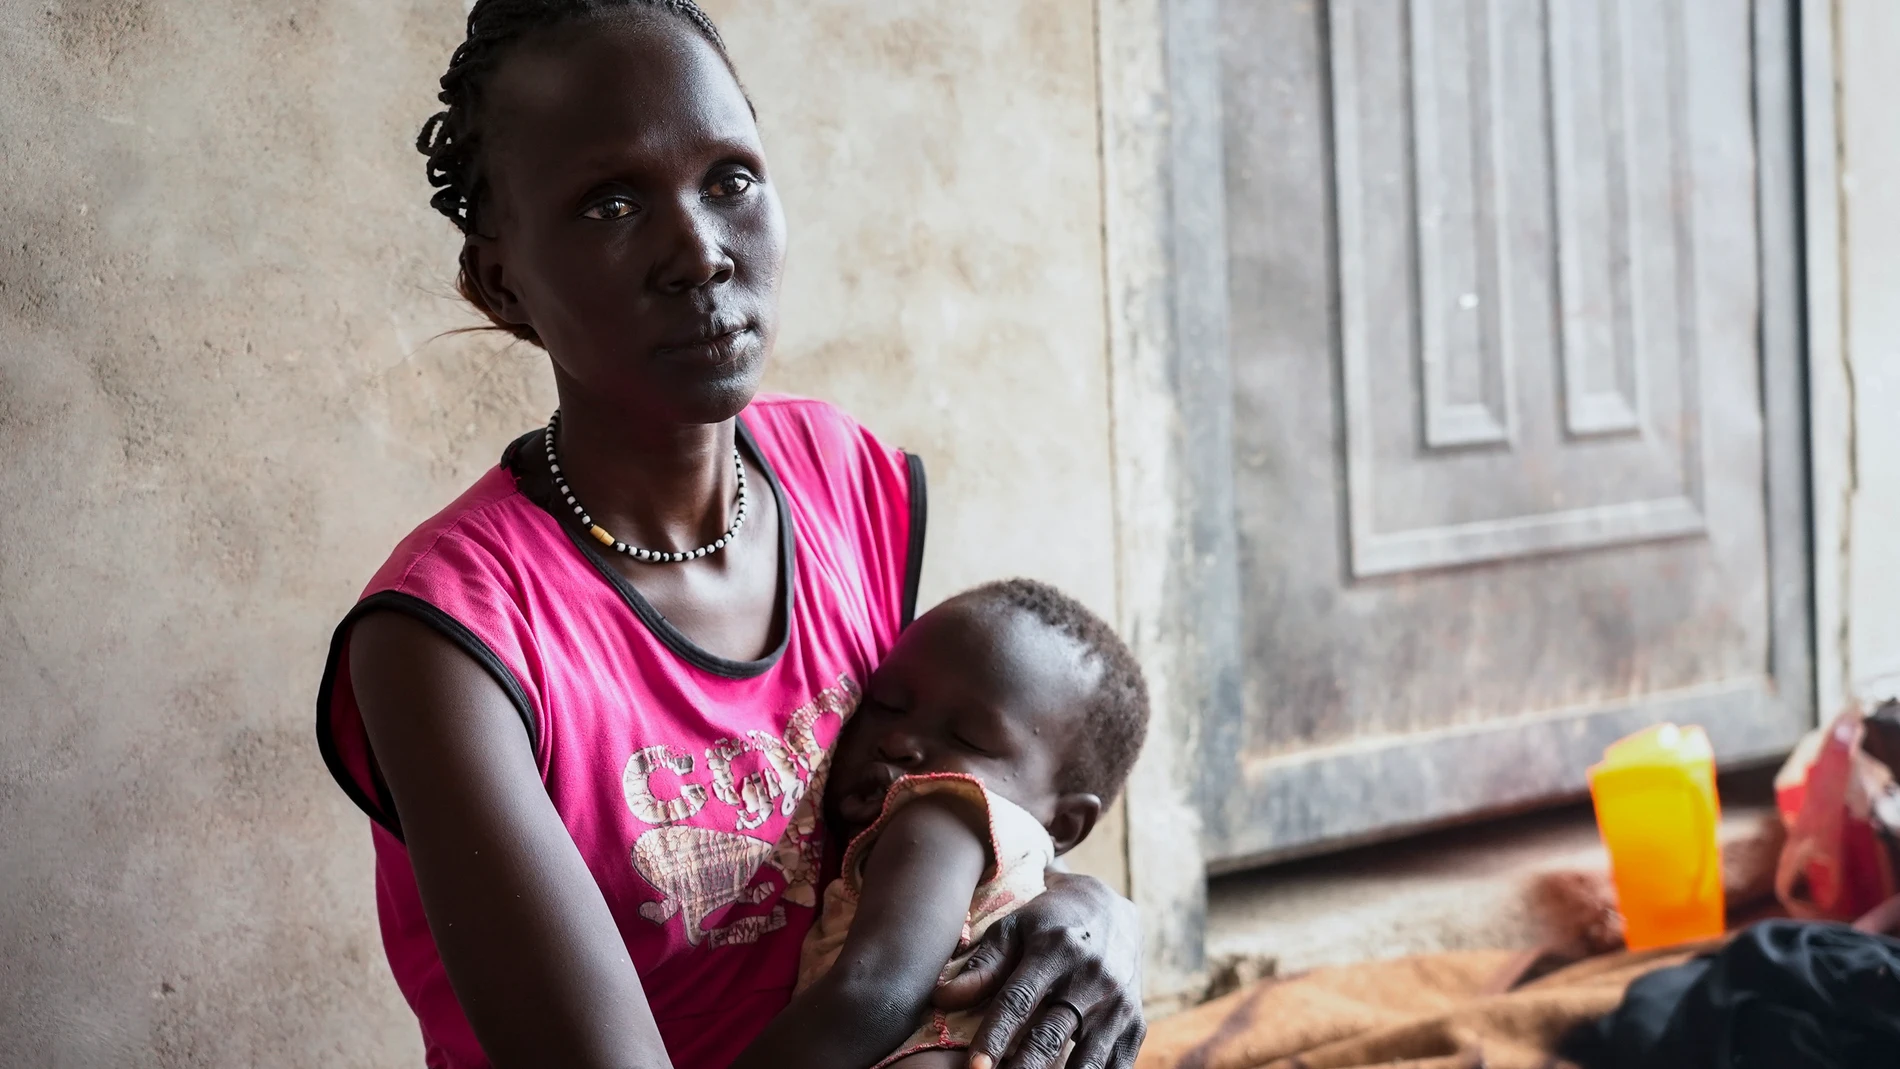 South Sudanese Alwel Ngok, 31, who fled from Sudan, sits holding her son in a church in Renk, South Sudan Tuesday, May 16, 2023. Tens of thousands of South Sudanese are flocking home from neighboring Sudan, which erupted in violence last month. (AP Photo/Sam Mednick)